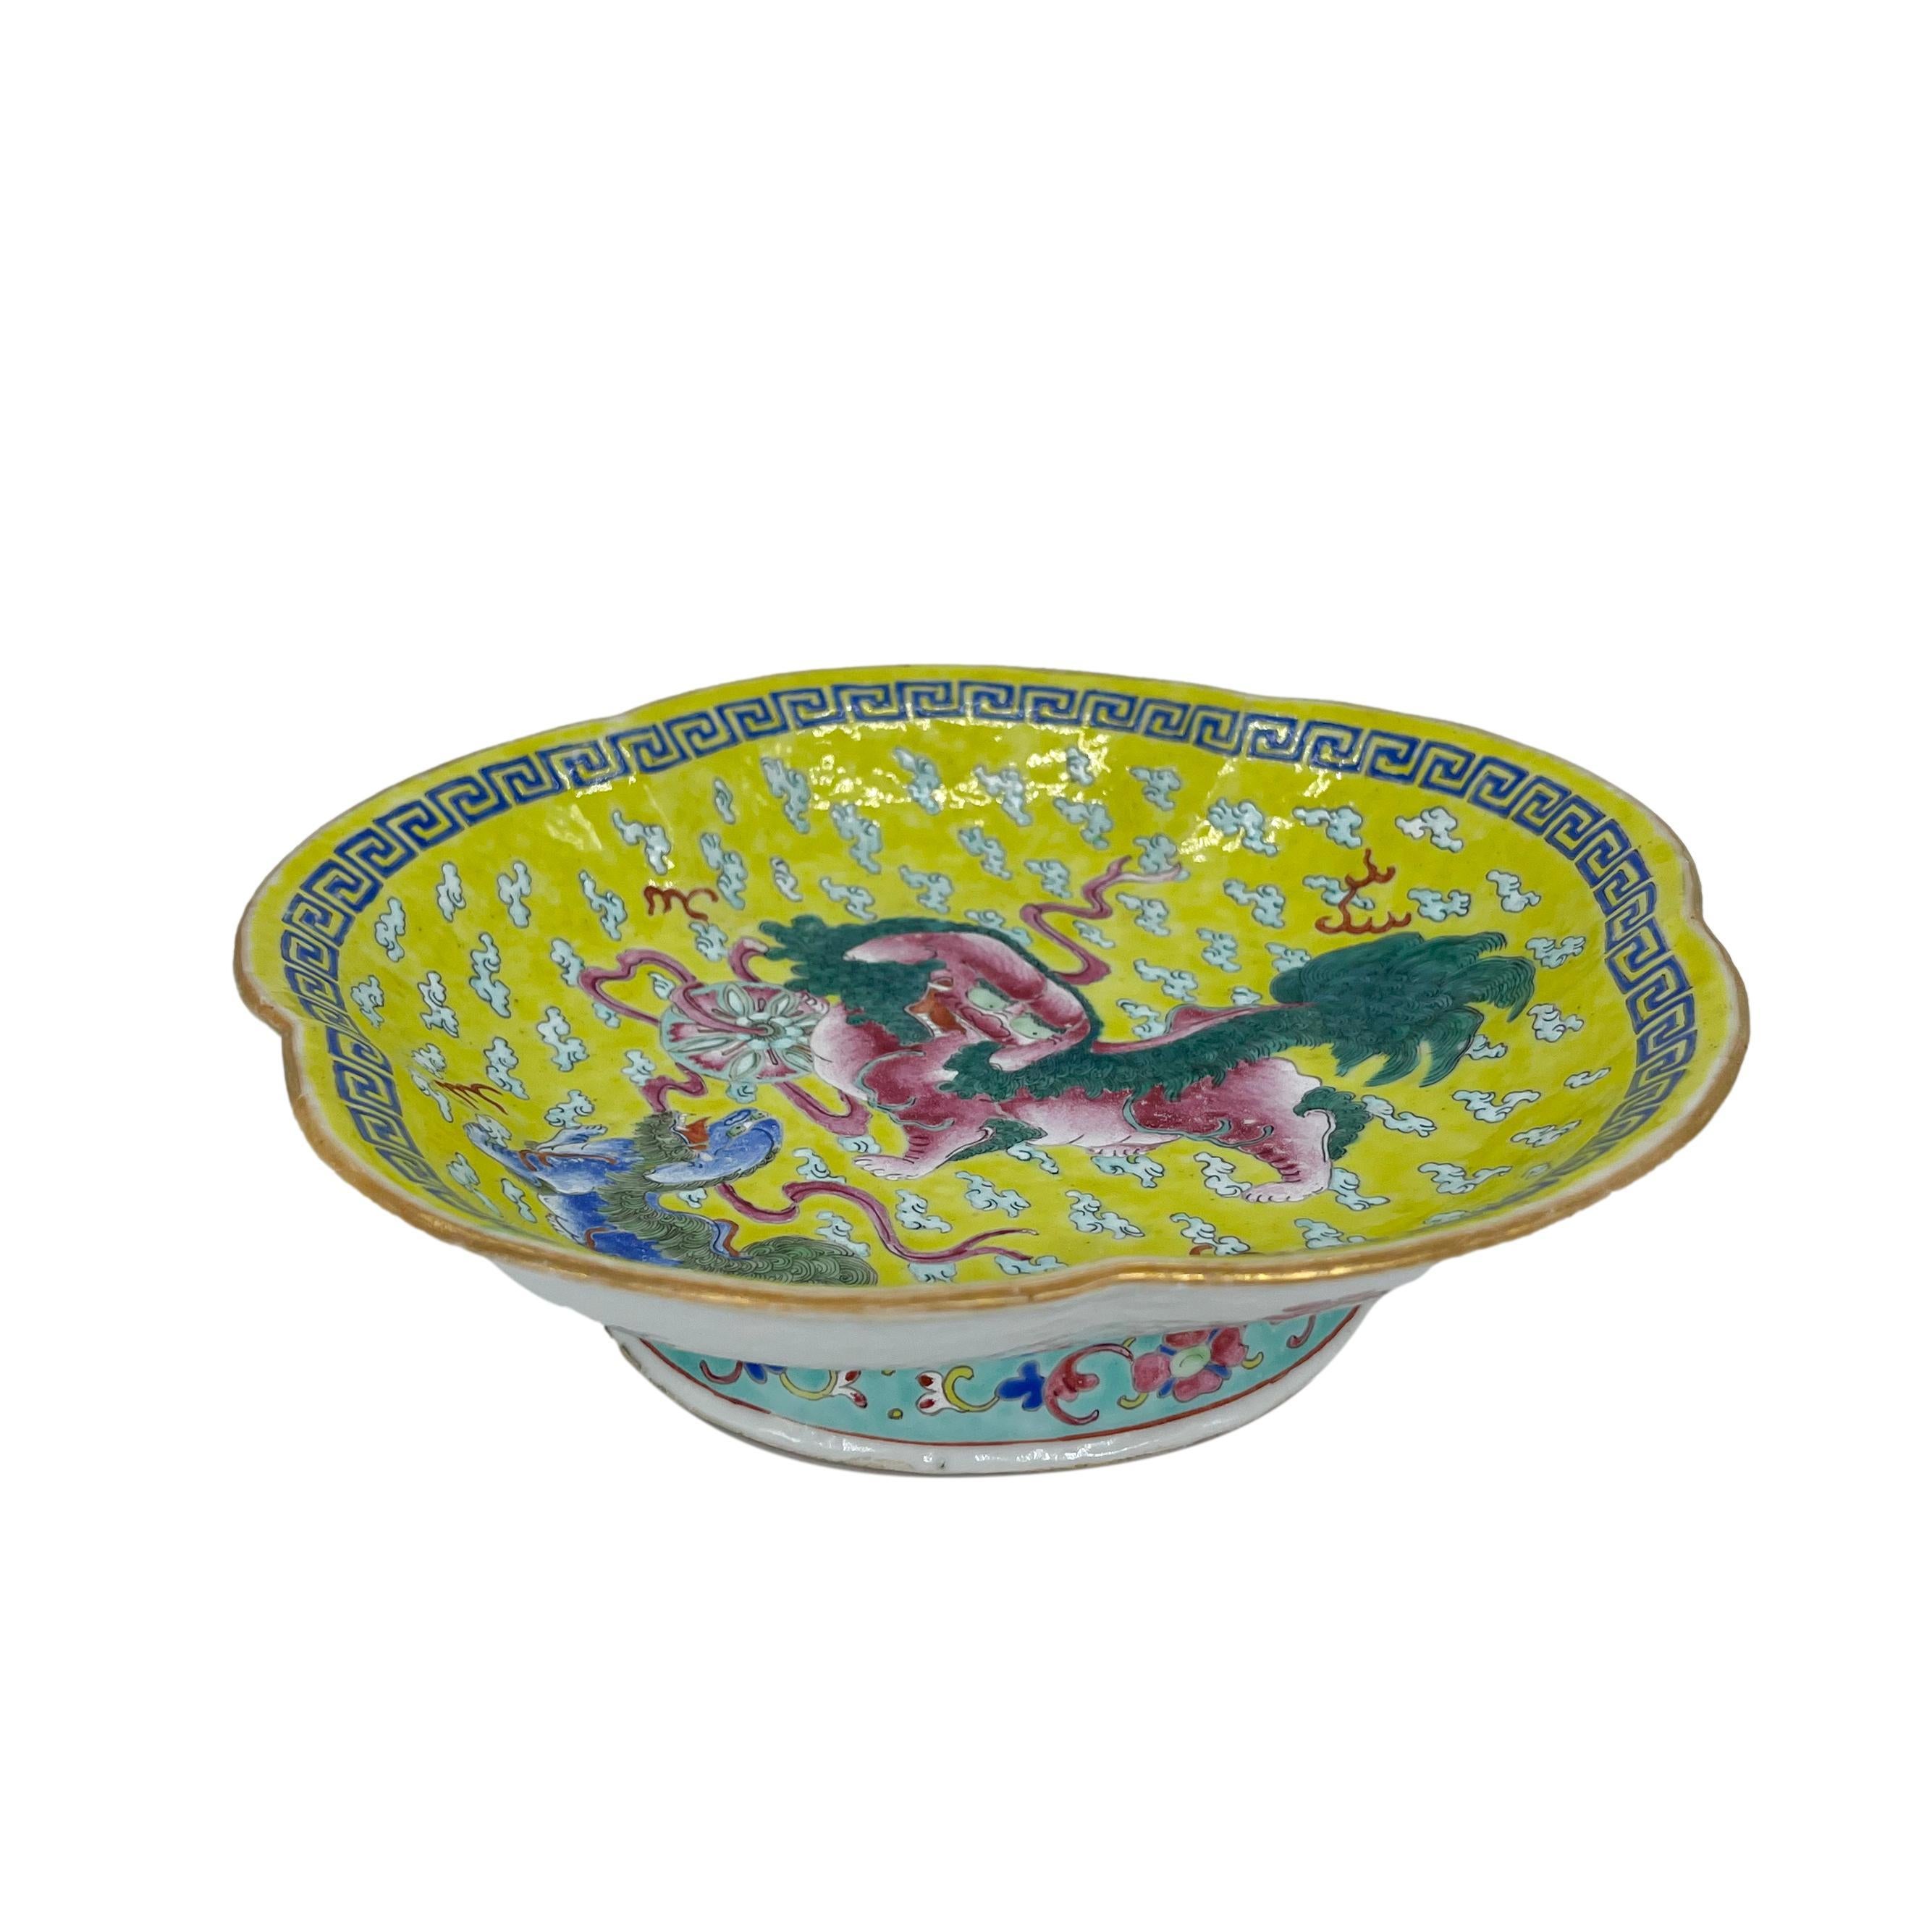 Enameled Chinese Export Porcelain Canton Famille Jeune Footed Dish, ca. 1870 For Sale